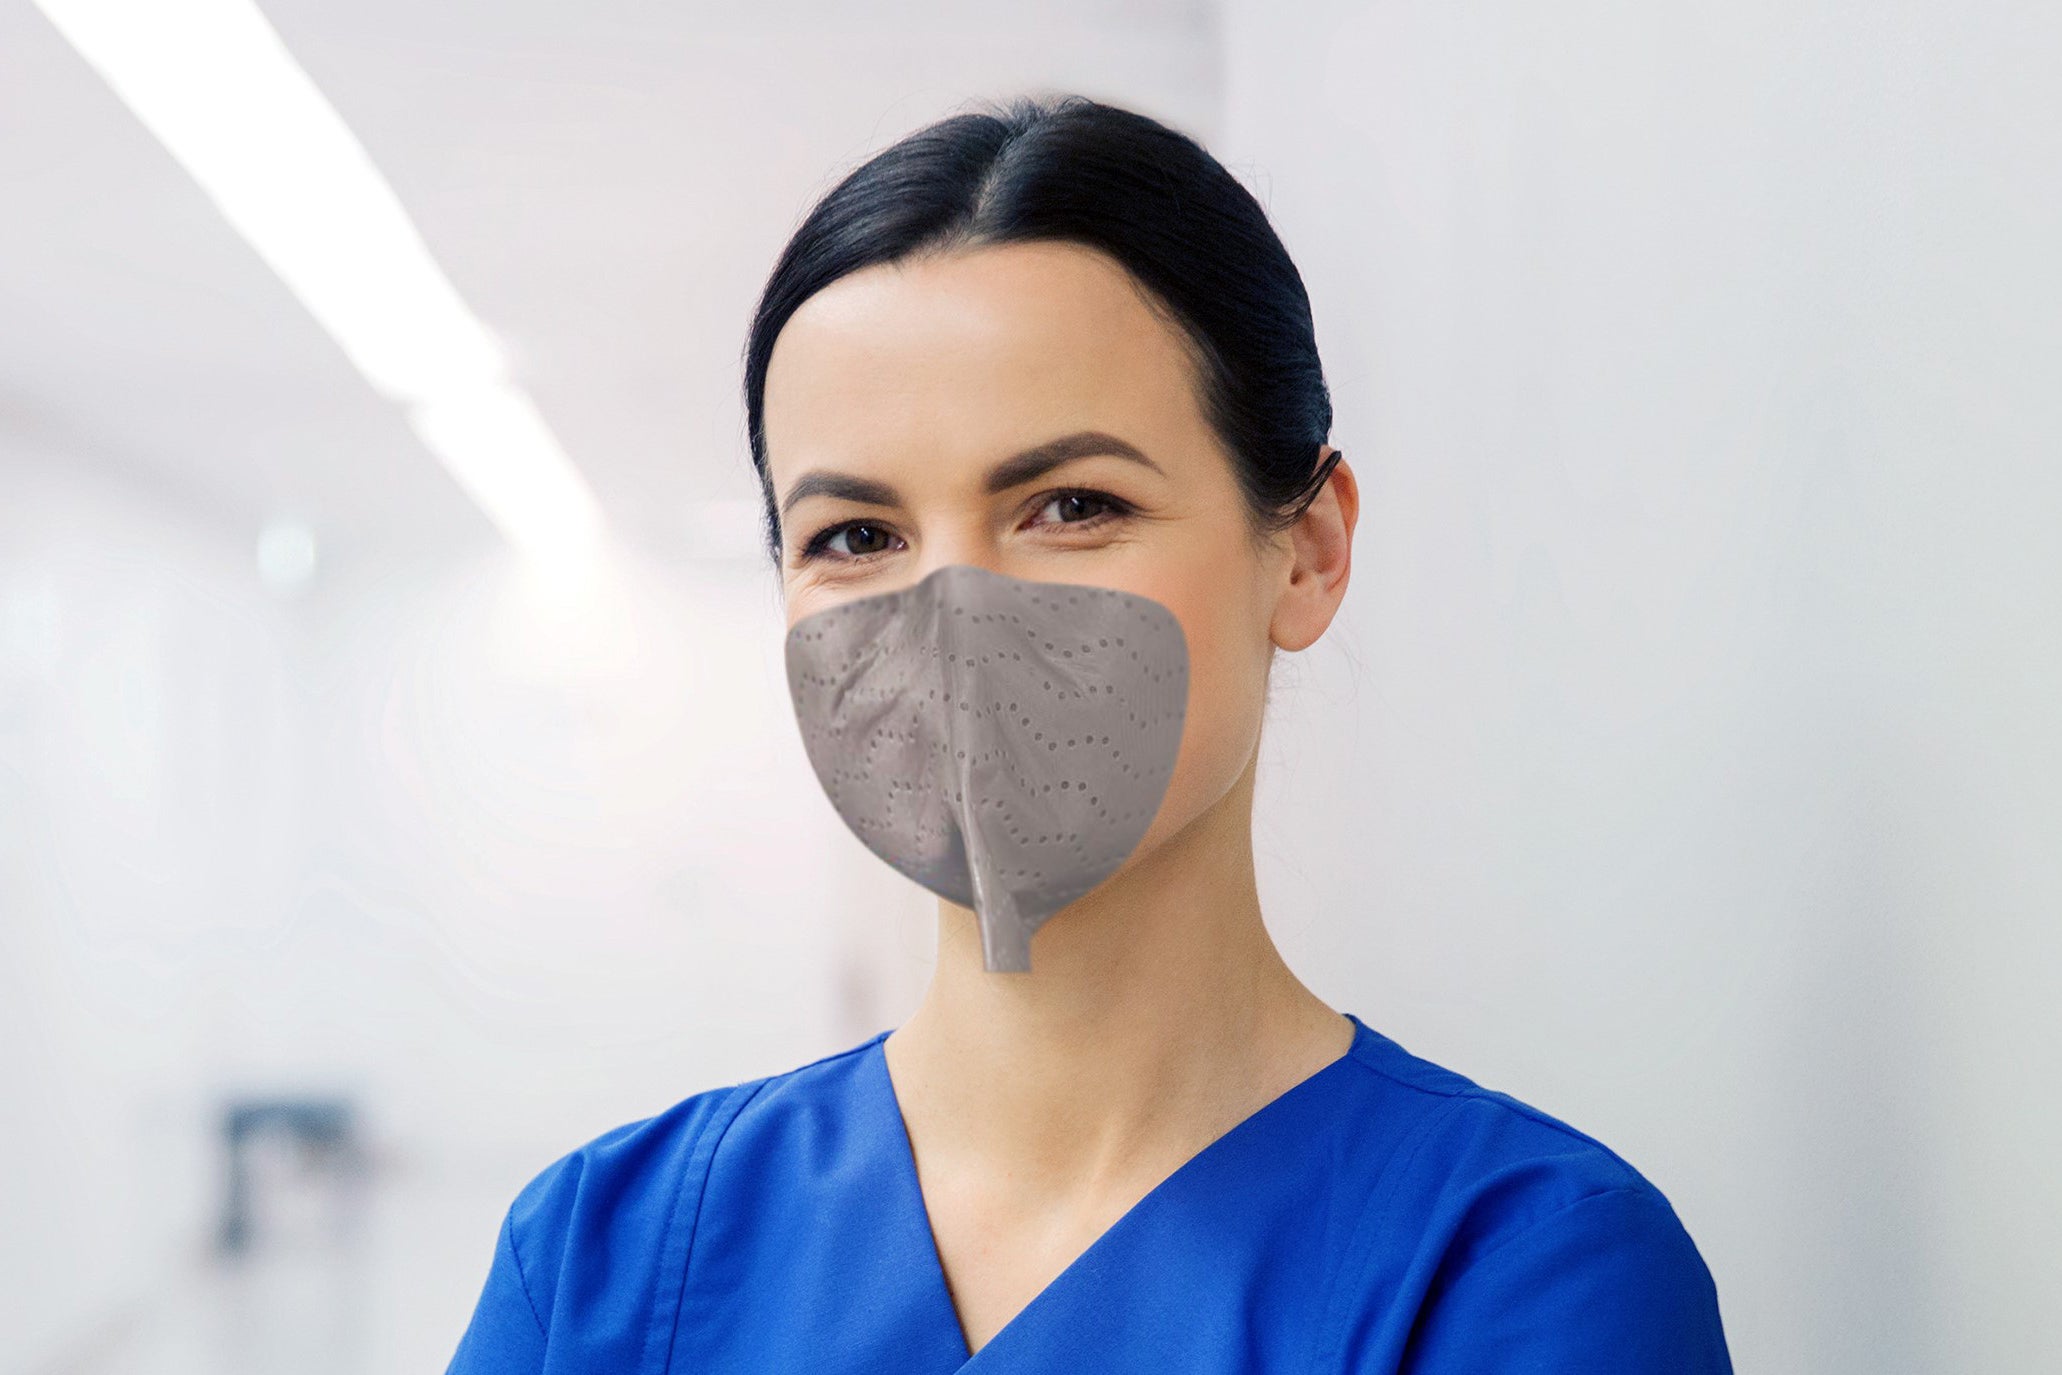 The strap-free ReadyMask adheres directly to the wearer's skin.